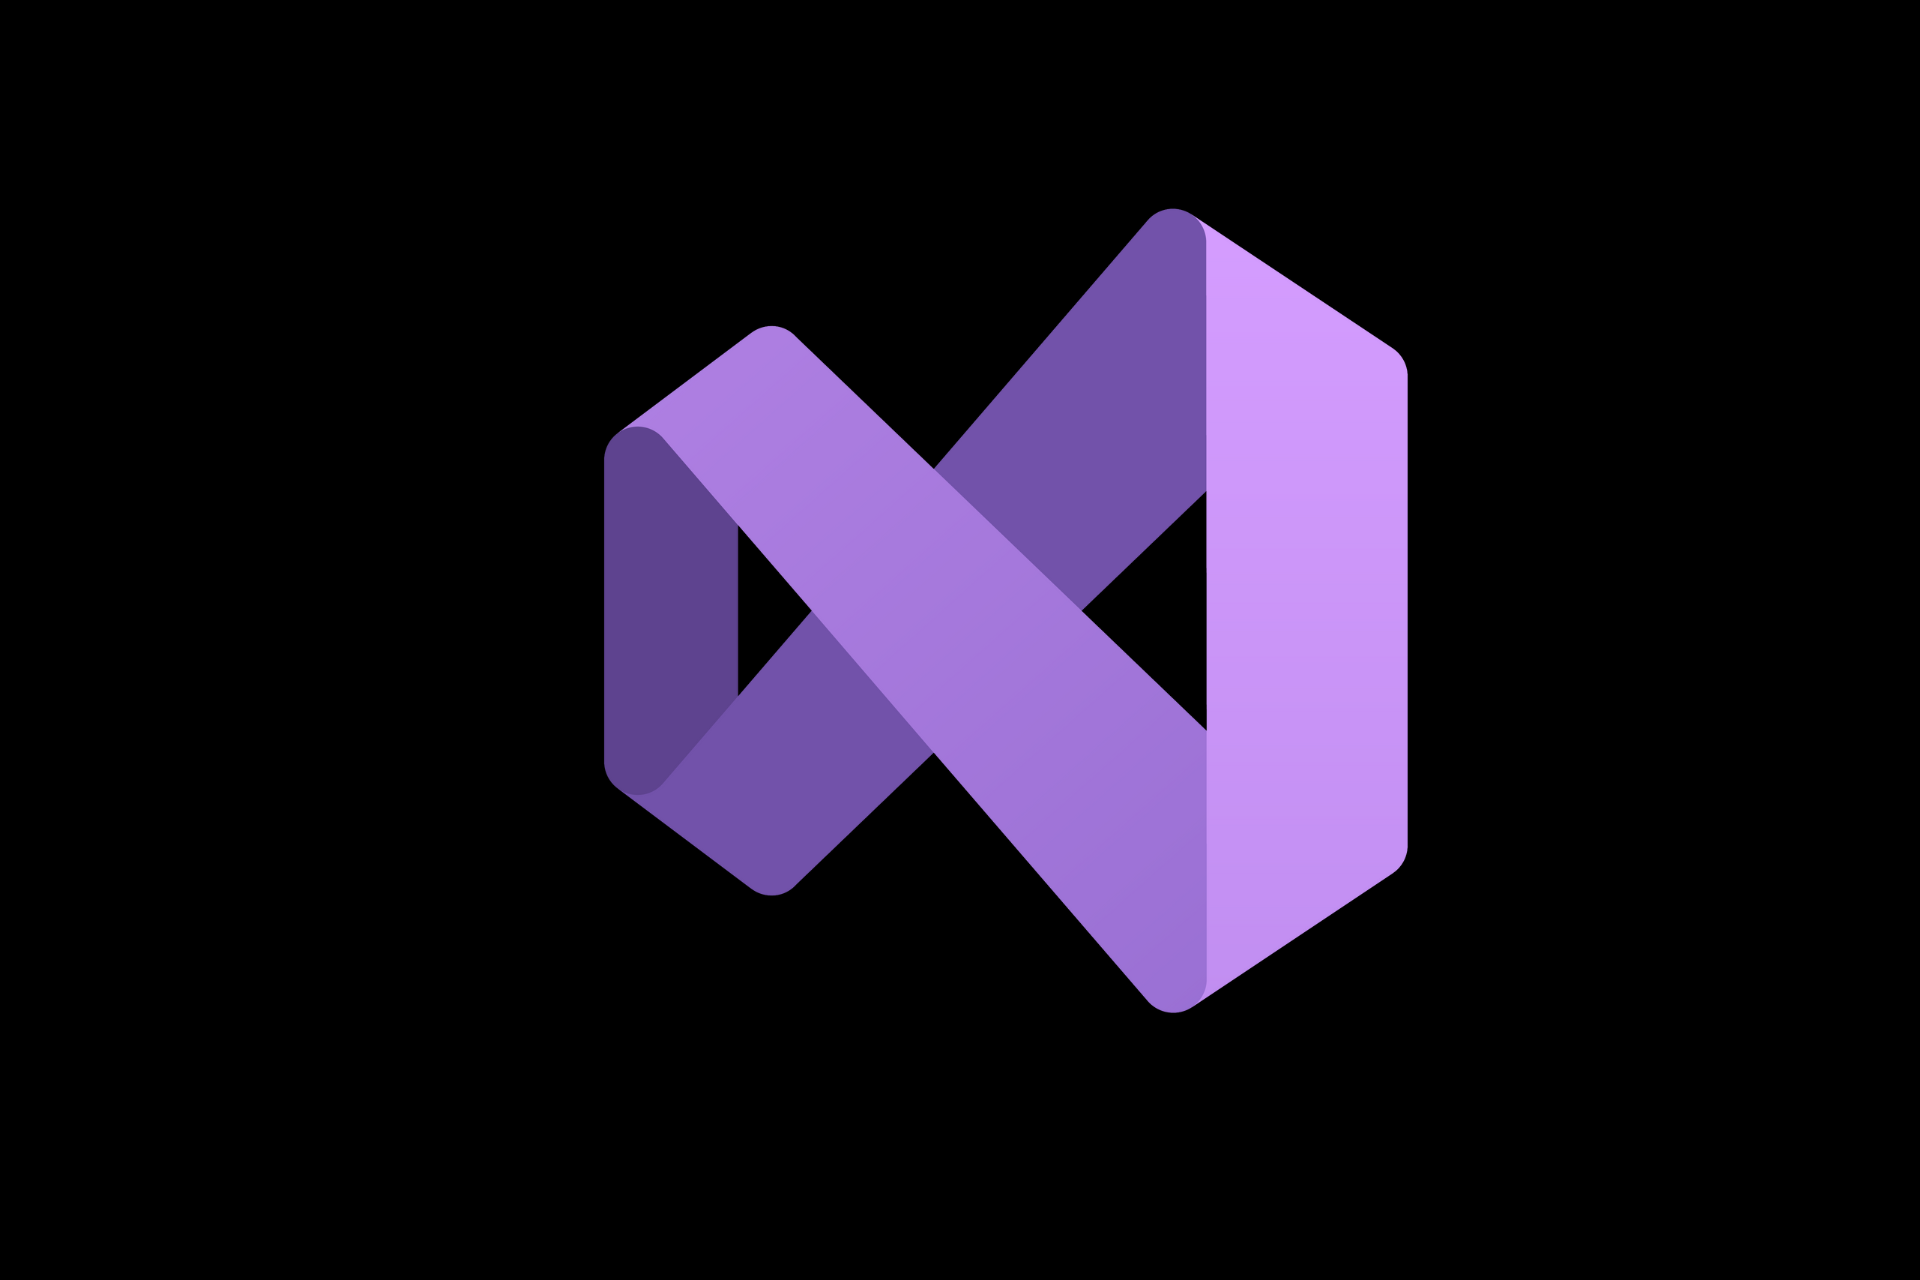 Visual Studio 2022 17.10 is out and comes with GitHub Copilot integration